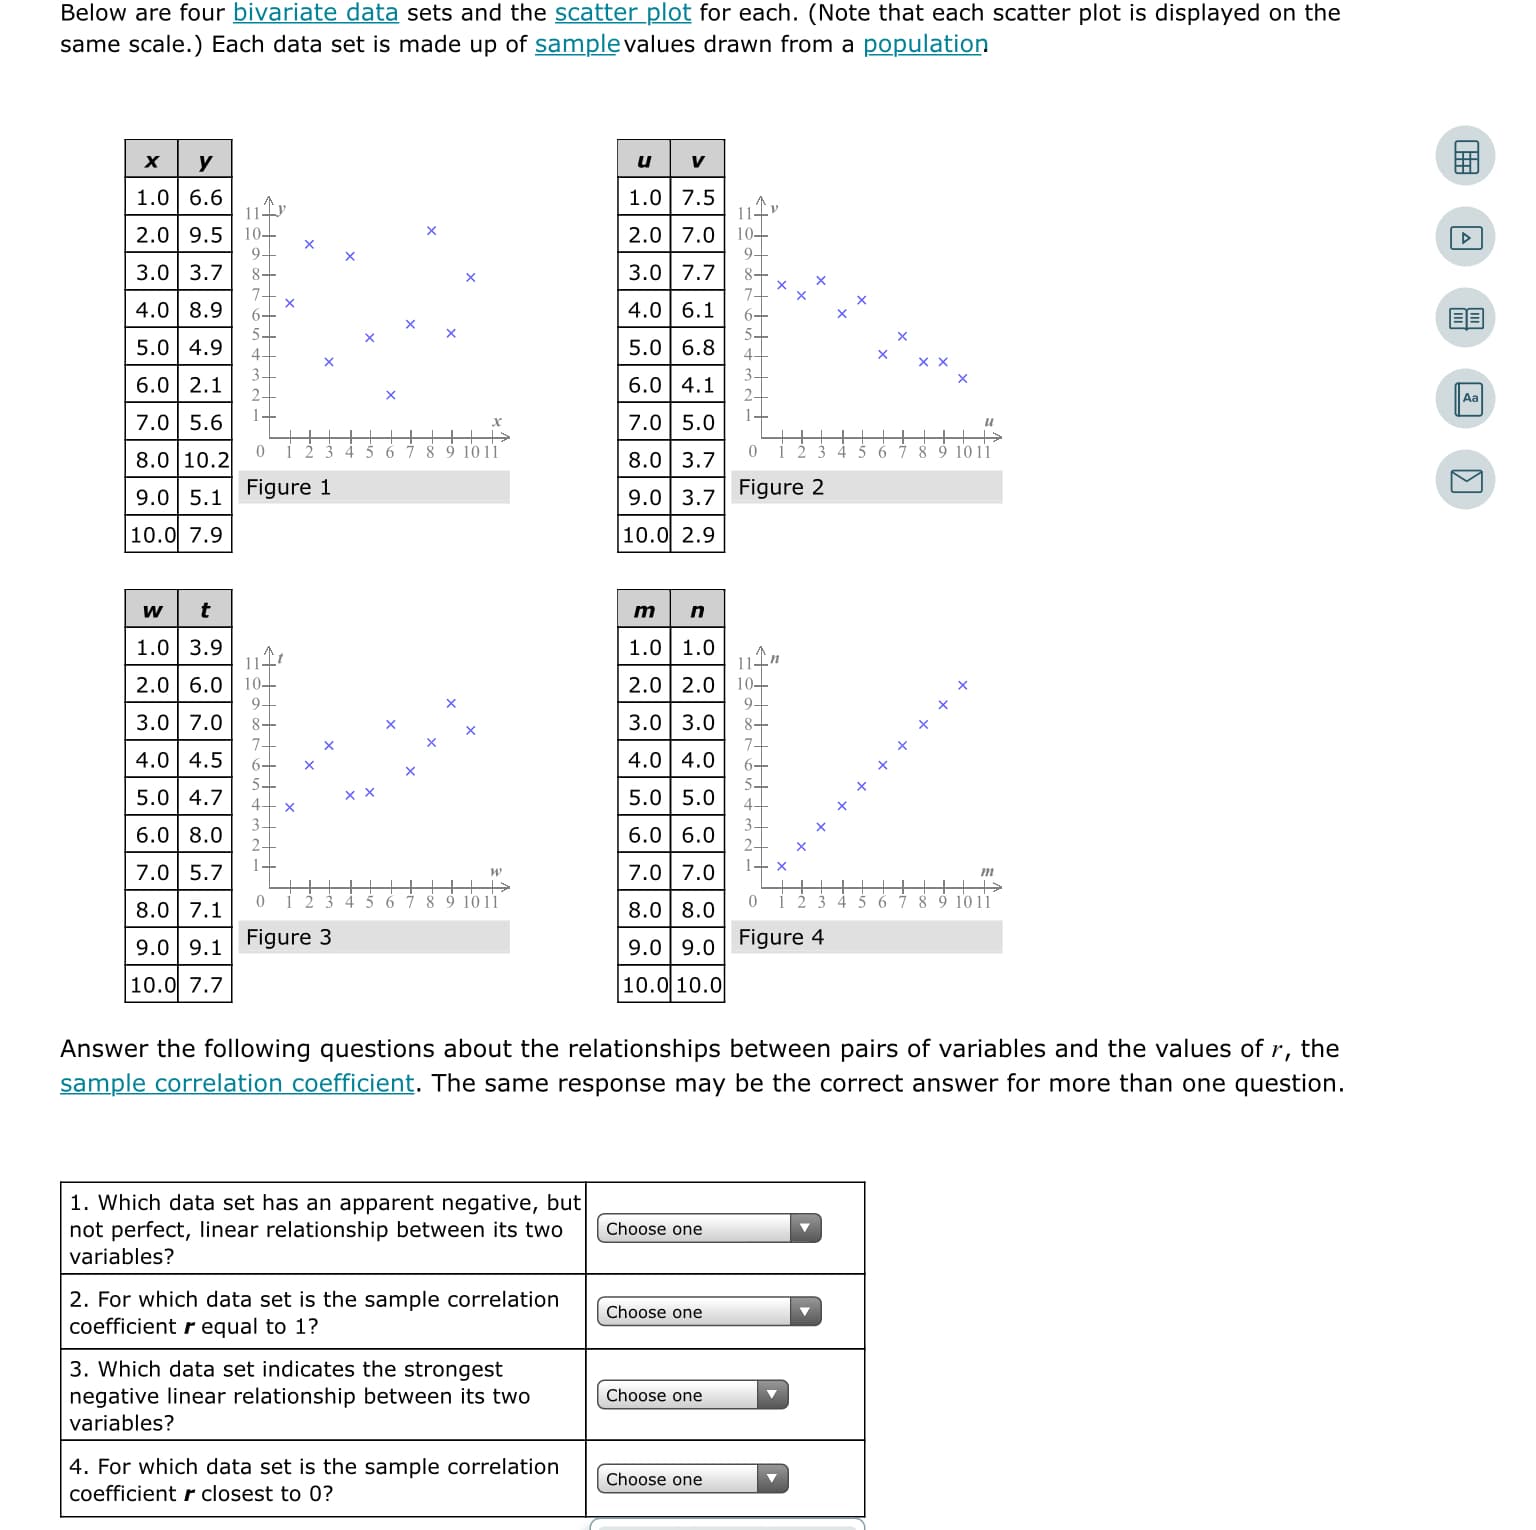 Below are four bivariate data sets and the scatter plot for each. (Note that each scatter plot is displayed on the
same scale.) Each data set is made up of samplevalues drawn from a population
х
1.0 6.6
1.0 7.5
2.0 9.5
9-
3.0 3.7
10-
2.0 7.0
10-
9-
3.0 7.7
4.0 8.9
4.0 6.1
5.0 4.9
4-
5.0| 6.8
4-
6.0 2.1
6.0 4.1
7.0 5.6
7.0 5.0
и
9 10 11
9 1011
8.0 10.2
8.0 3.7
9.0 5.1
Figure 1
9.0 3.7
Figure 2
10.0 7.9
10.0 2.9
1.0 3.9
114
2.0 6.0| 10-
94
3.0 7.0
7-
4.0 4.5
1.0| 1.0
2.0 2.0| 10–
9-
3.0 3.0
8-
7-
4.0 4.0
5.0 4.7
5.0 5.0
6.0 8.0
3-
6.0| 6.0
2-
1-
7.0 5.7
7.0| 7.0
т
5 6
7 8 9 1011
4 5 6 7 8 9 1011
8.0 7.1
8.0 8.0
9.0 9.1
Figure 3
9.0 9.0
Figure 4
10.0 7.7
10.0 10.0
Answer the following questions about the relationships between pairs of variables and the values of .
r,
the
sample correlation coefficient. The same response may be the correct answer for more than one question.
1. Which data set has an apparent negative, but
not perfect, linear relationship between its two
Choose one
variables?
2. For which data set is the sample correlation
coefficient r equal to 1?
Choose one
3. Which data set indicates the strongest
negative linear relationship between its two
variables?
Choose one
4. For which data set is the sample correlation
Choose one
coefficient r closest to 0?
